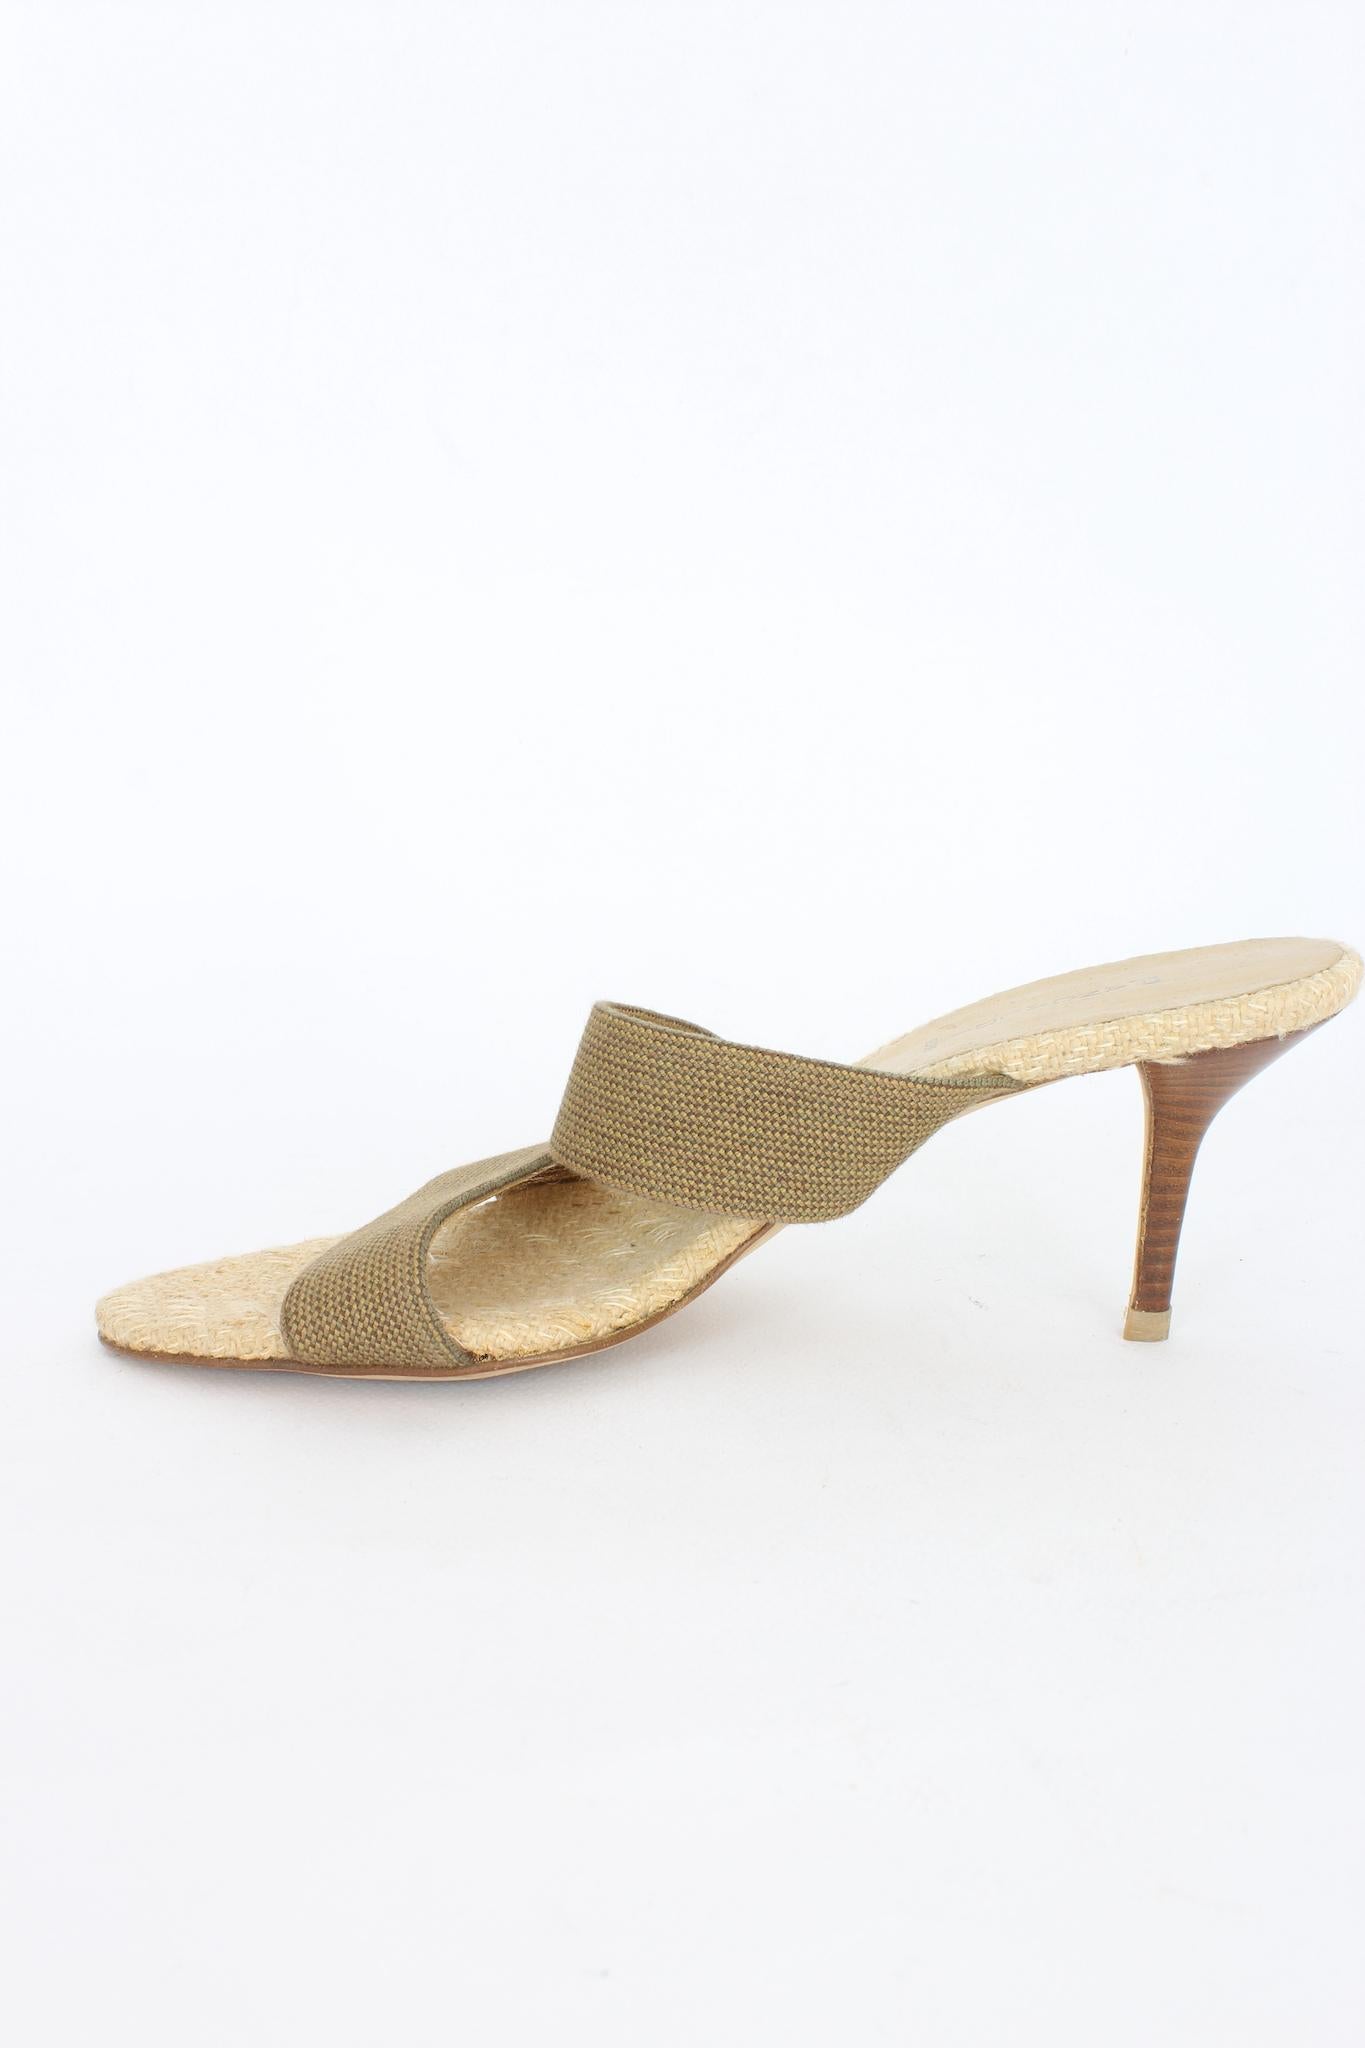 Pancaldi Leather Beige Vintage Sandal Shoes 90s In Excellent Condition For Sale In Brindisi, Bt